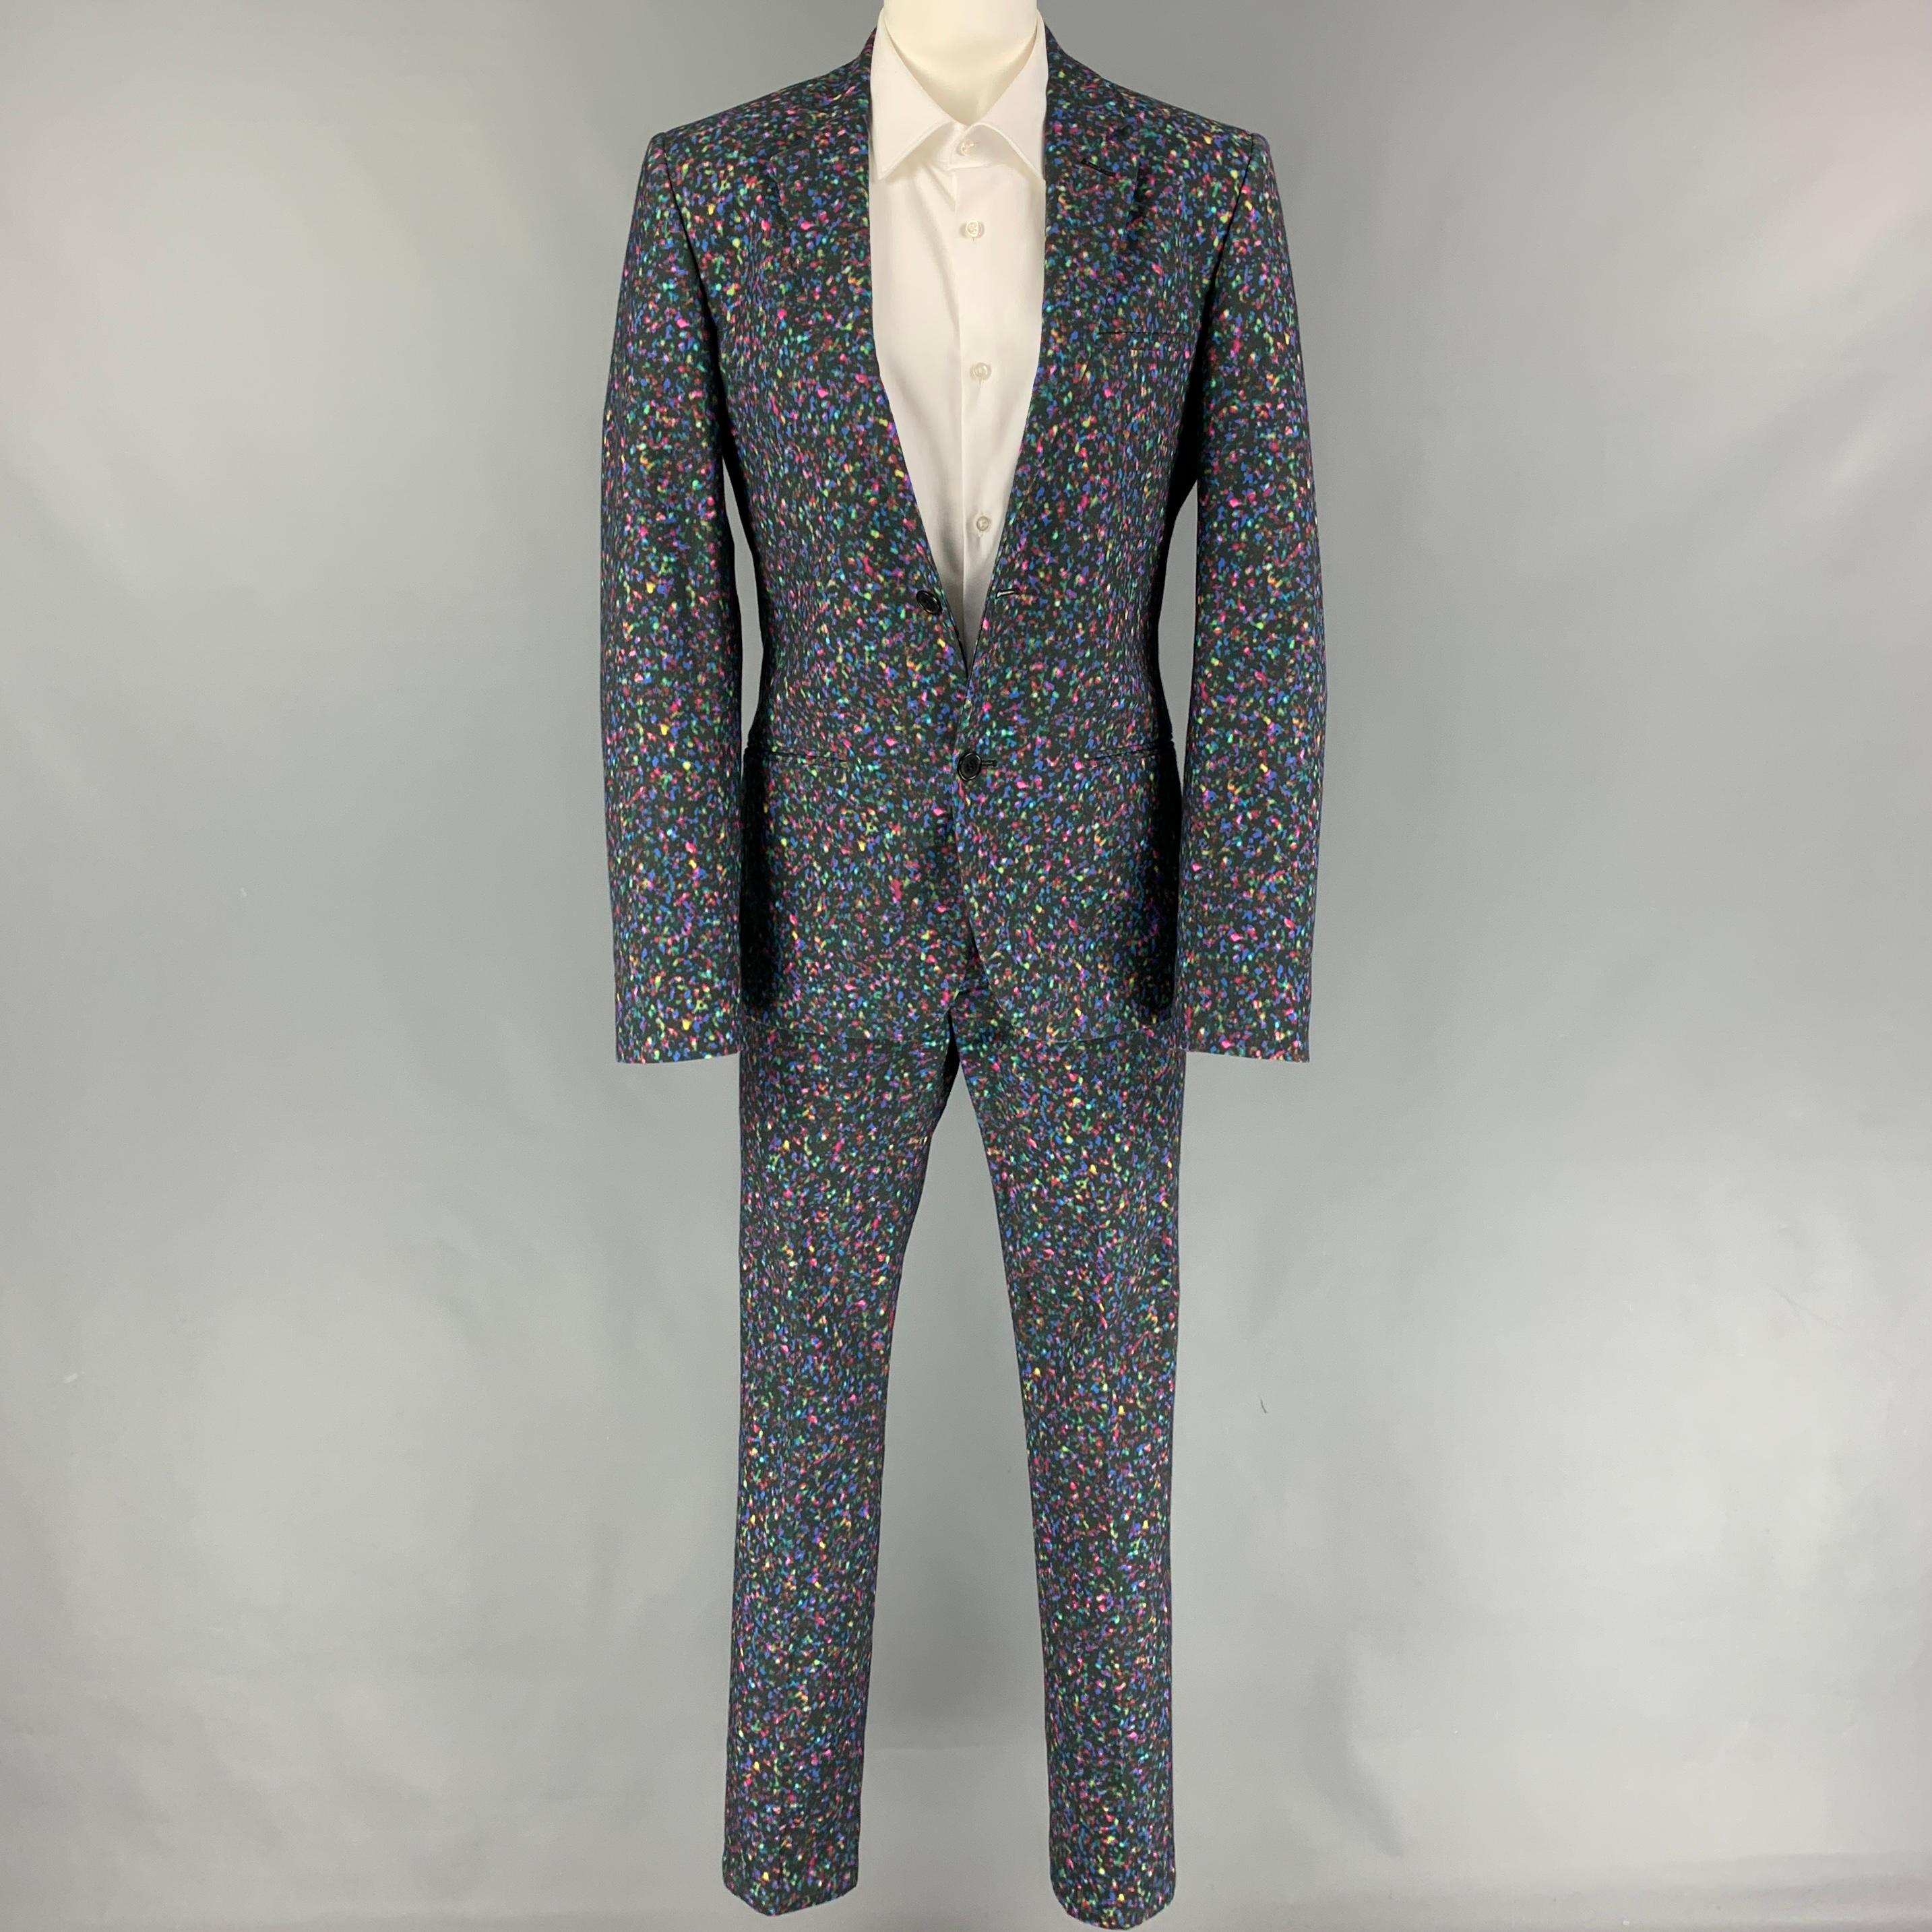 CALVIN KLEIN COLLECTION suit comes in a multi-color print cotton and includes a single breasted, double button sport coat with a notch lapel and matching flat front trousers.

Very Good Pre-Owned Condition.
Marked: